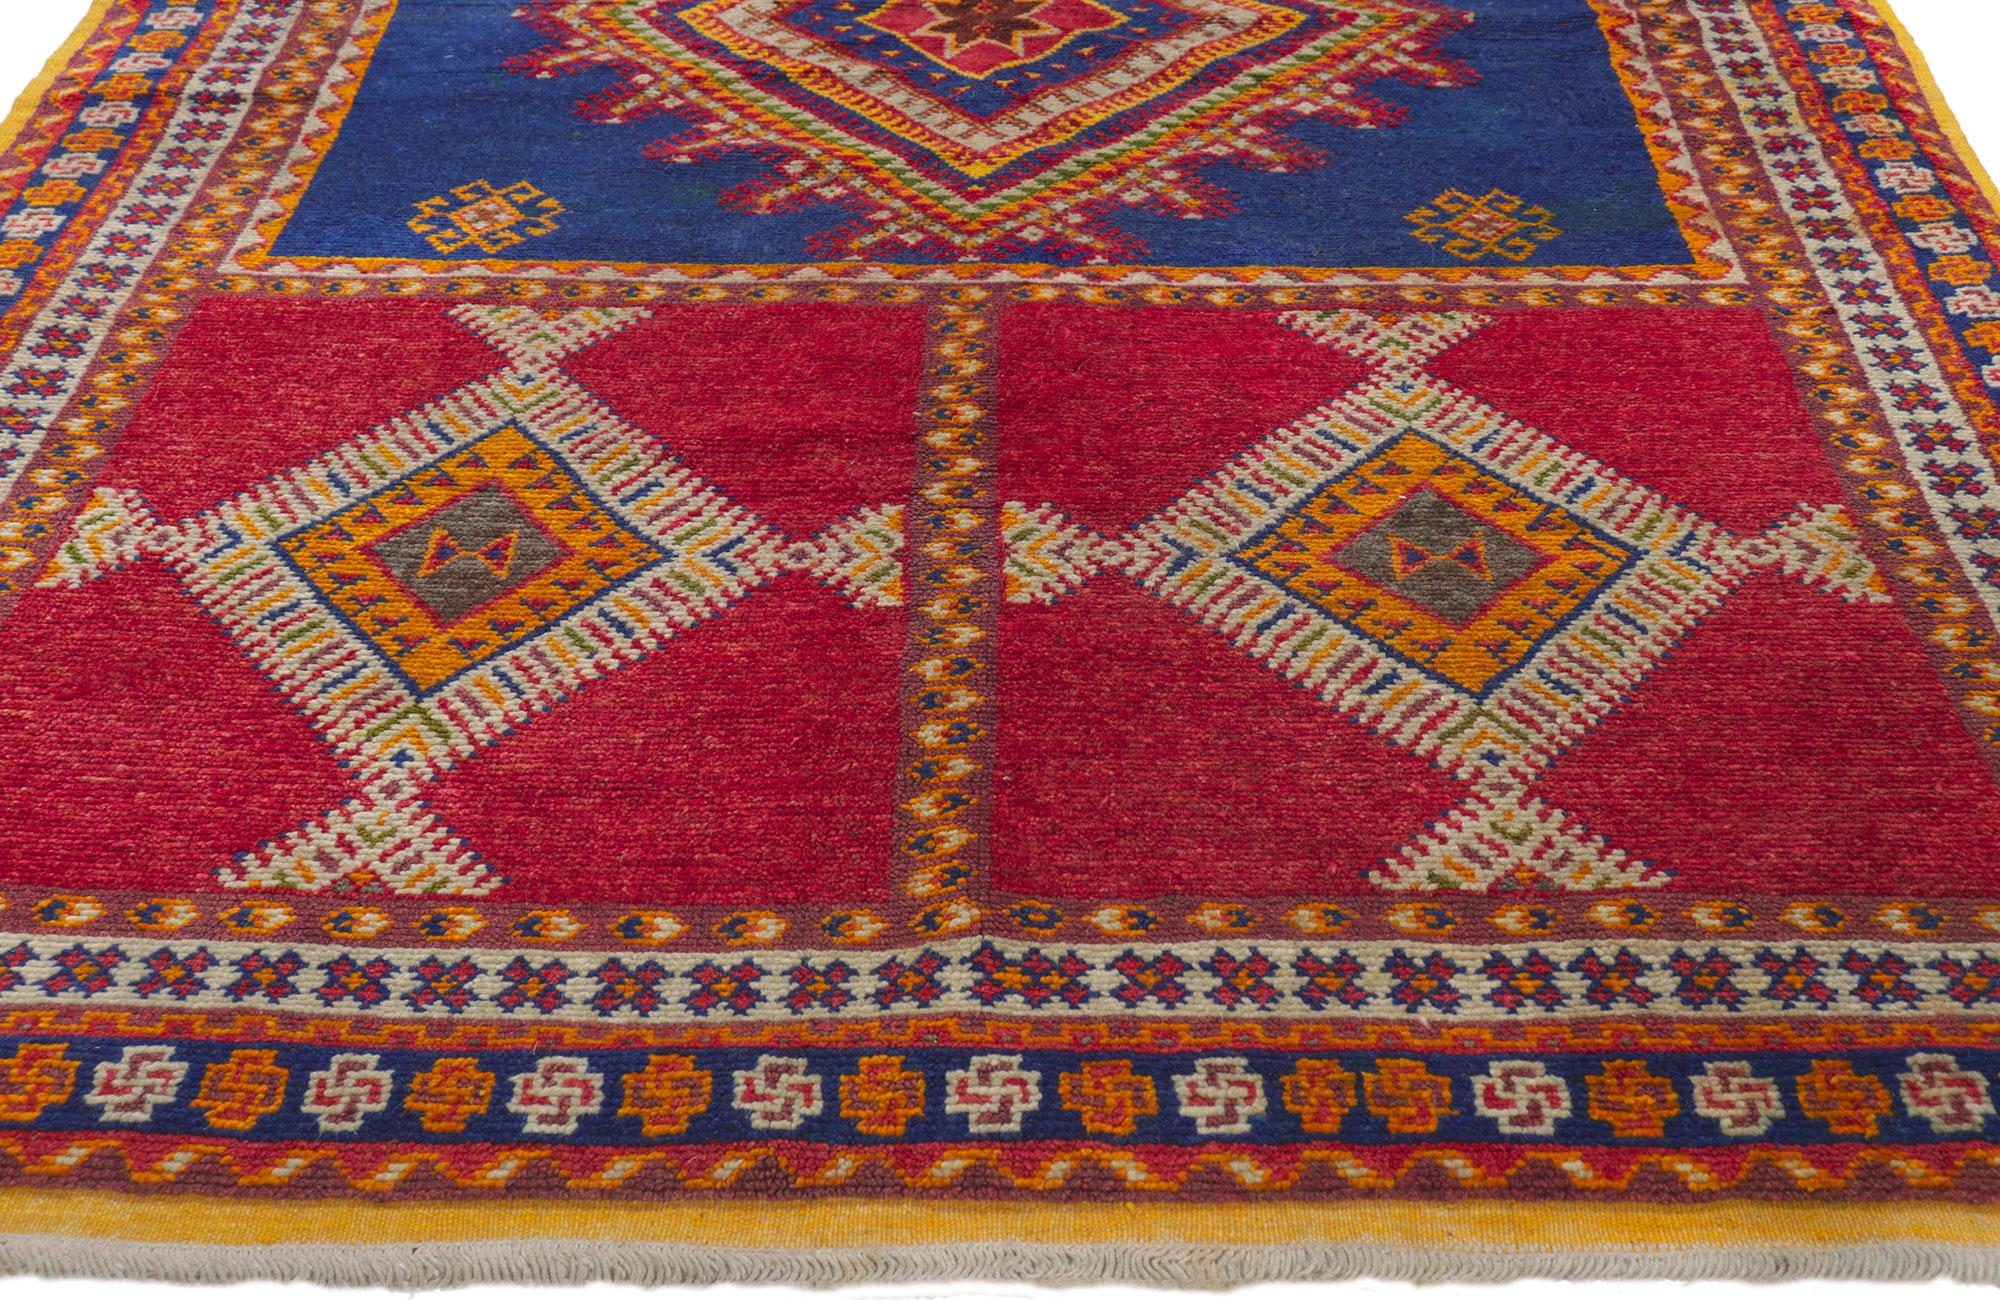 Hand-Knotted Vintage Taznakht Moroccan Rug by Berber Tribes of Morocco